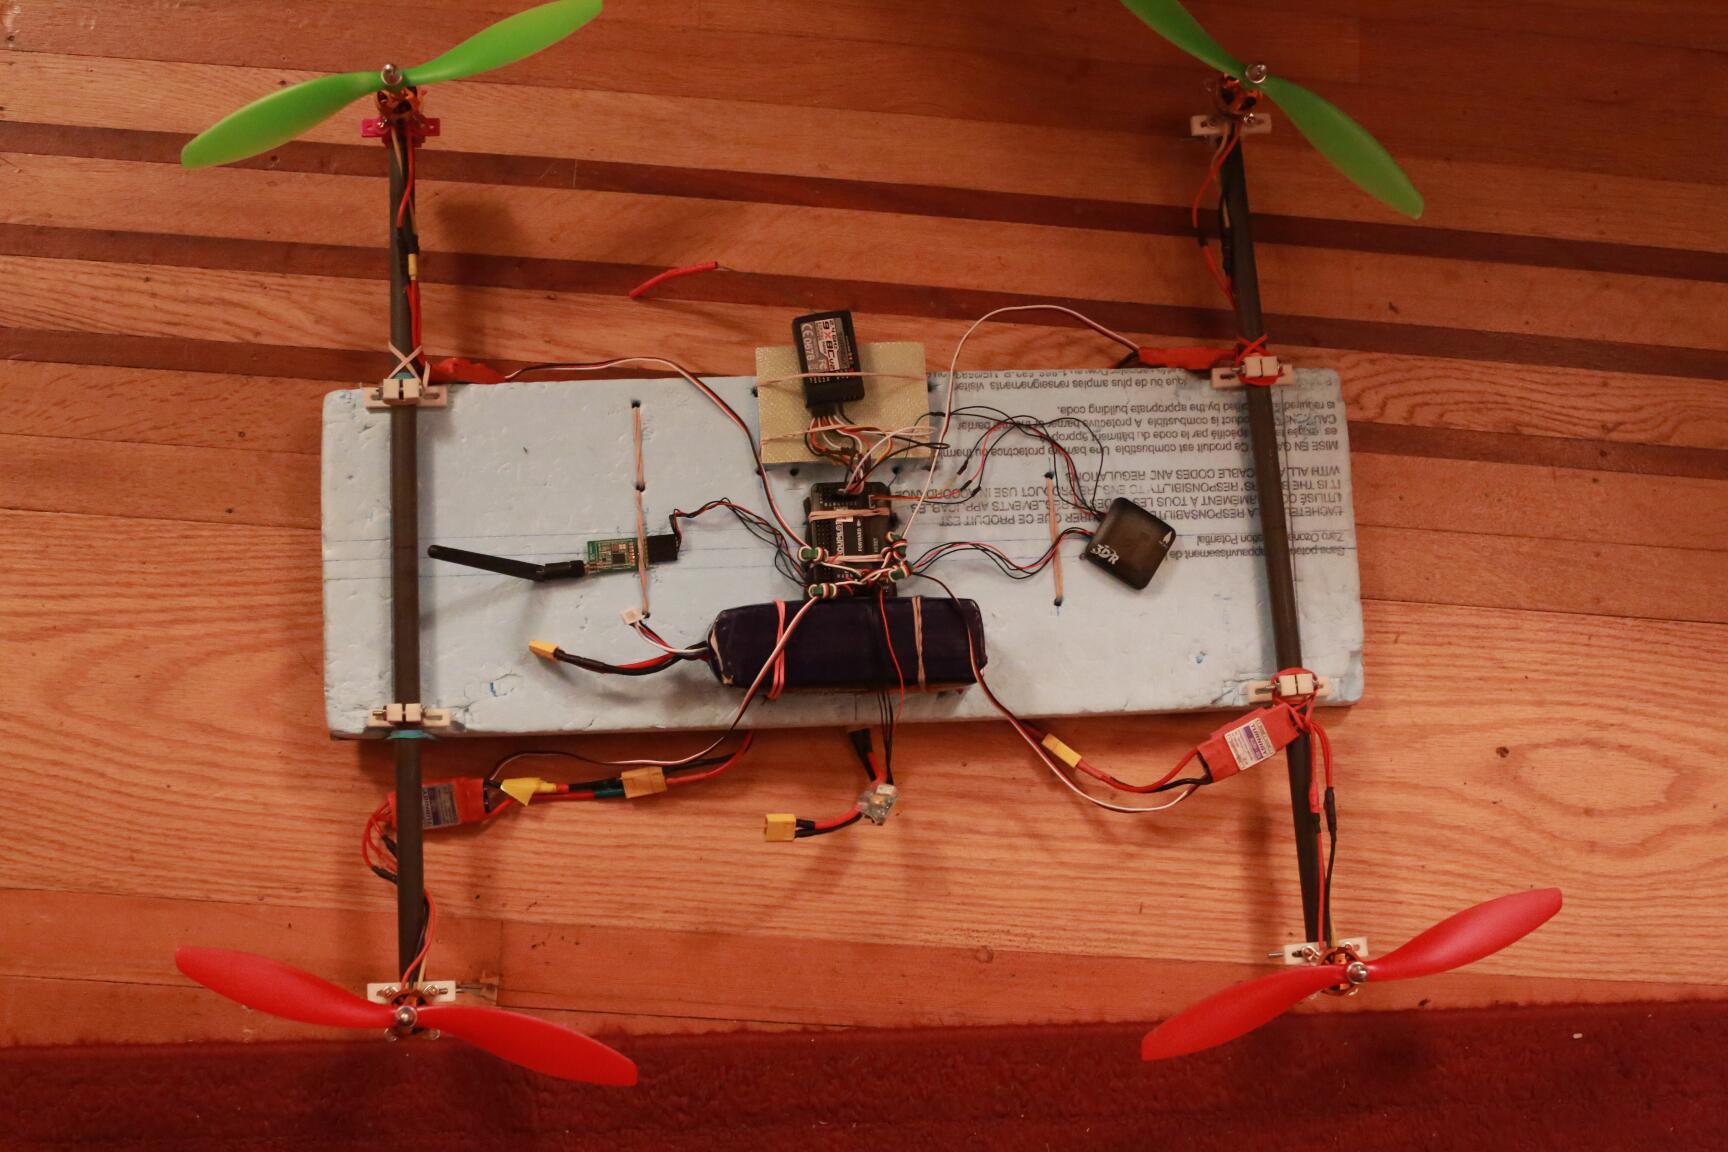 IBGL0125 Whole quad with parts laid out.jpg